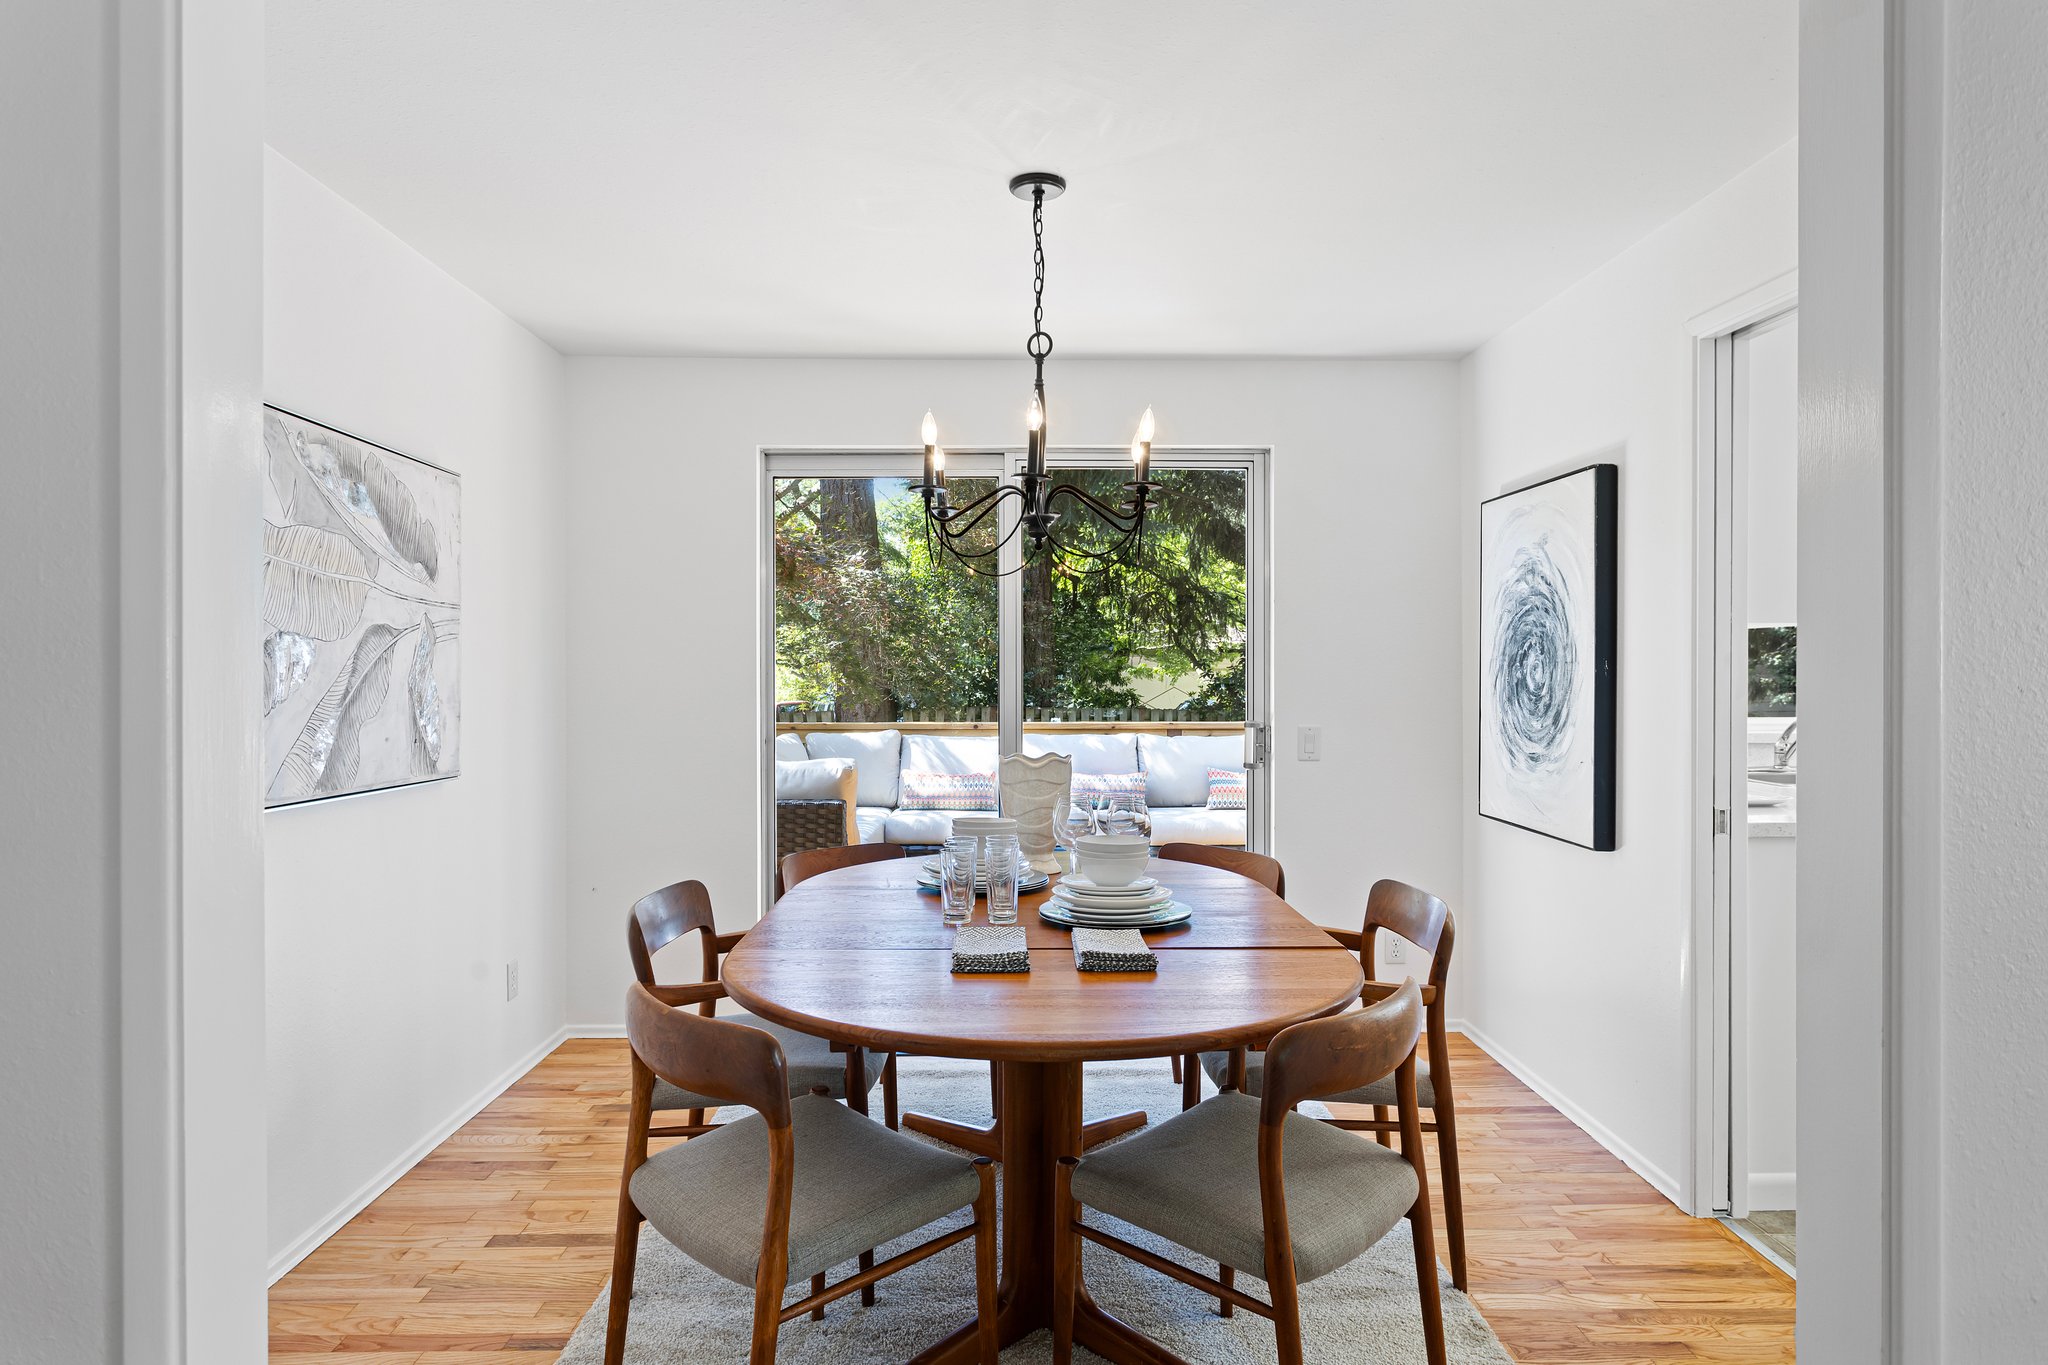 Enjoy your meal in the formal dining room with picturesque views of the front and back yards.